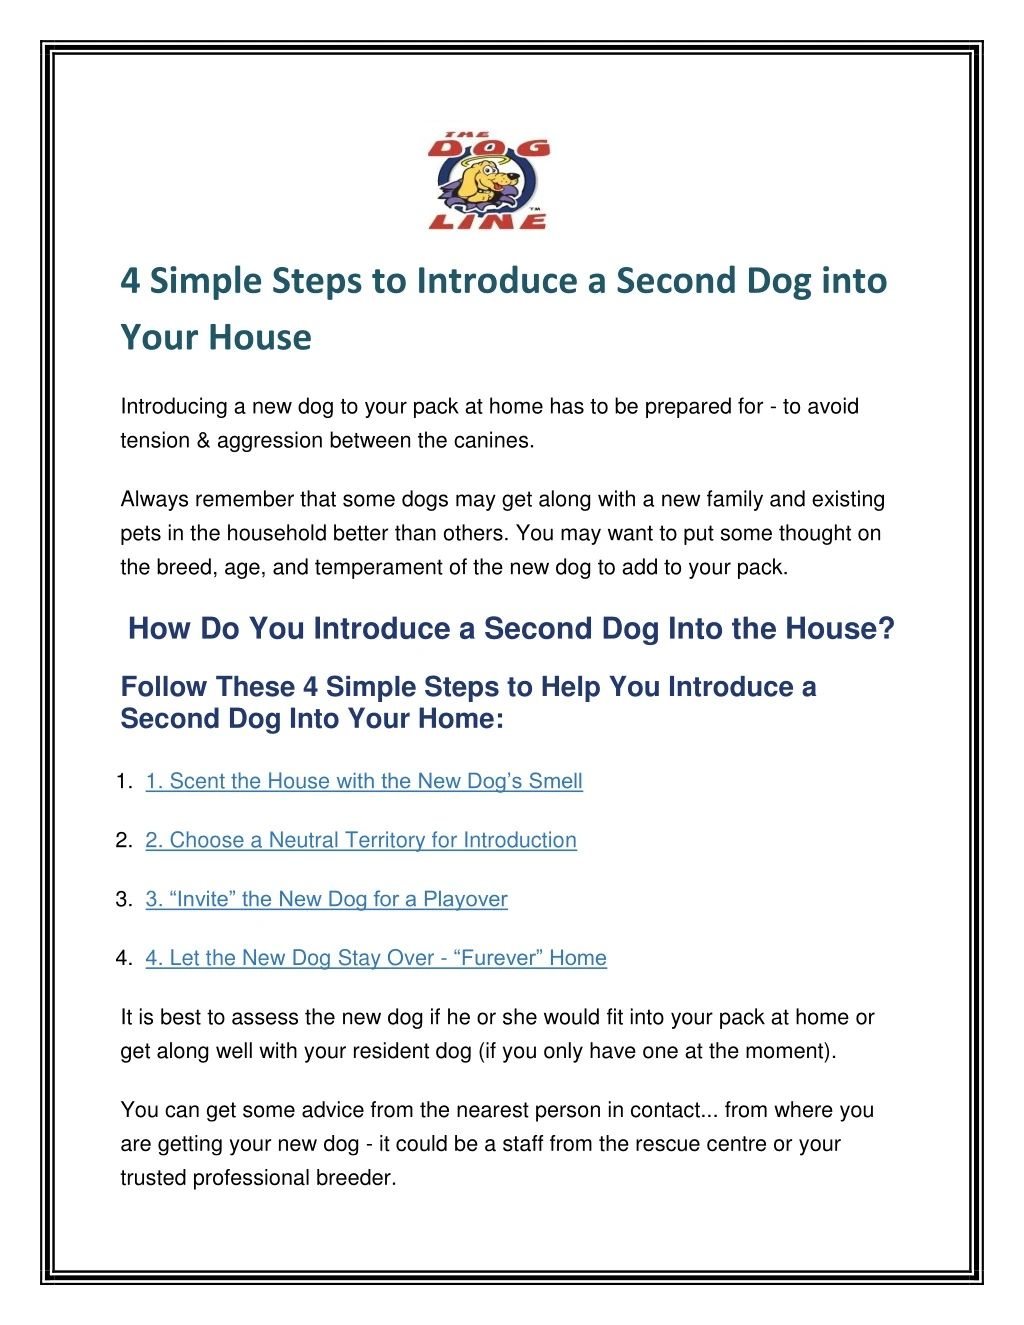 4 simple steps to introduce a second dog into